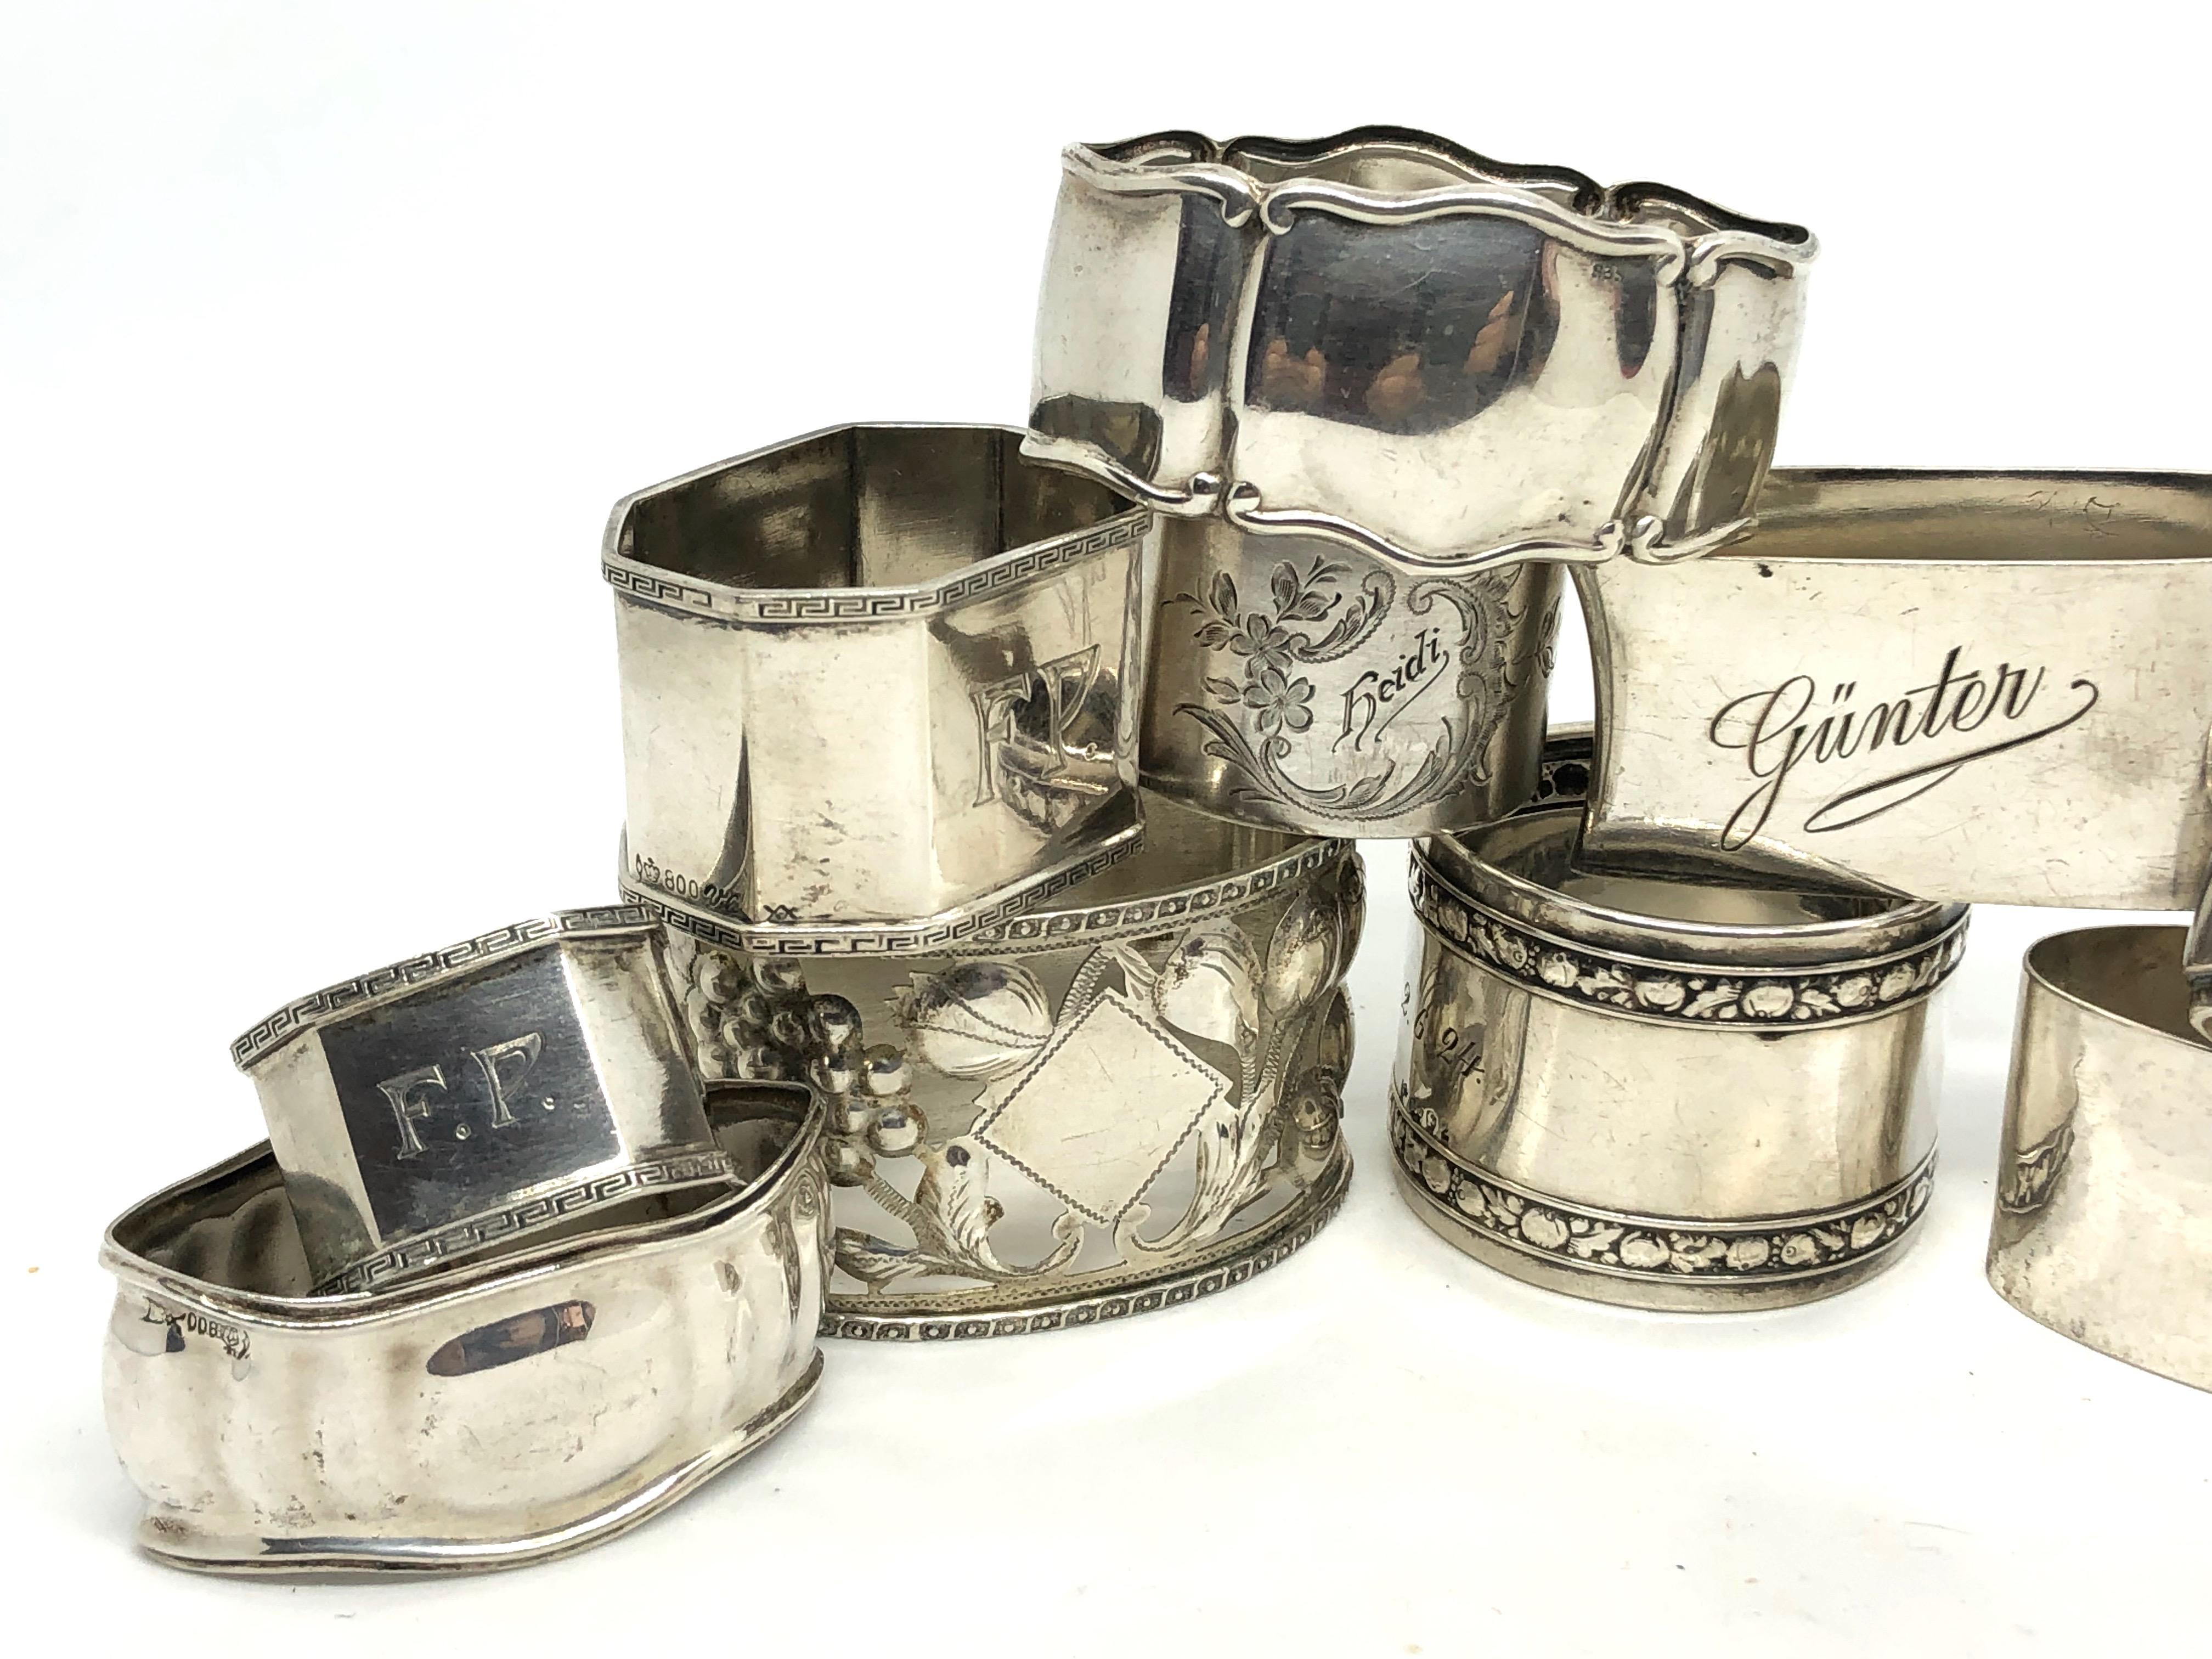 A mixed set of ten silver alloy napkin rings, circa 1924-1947, various makers. A nice selection of barrel, rectangular, paneled and round rings, one Art Nouveau one with fruit pattern engraved 14 on the backside (probably means 1914), ranging in